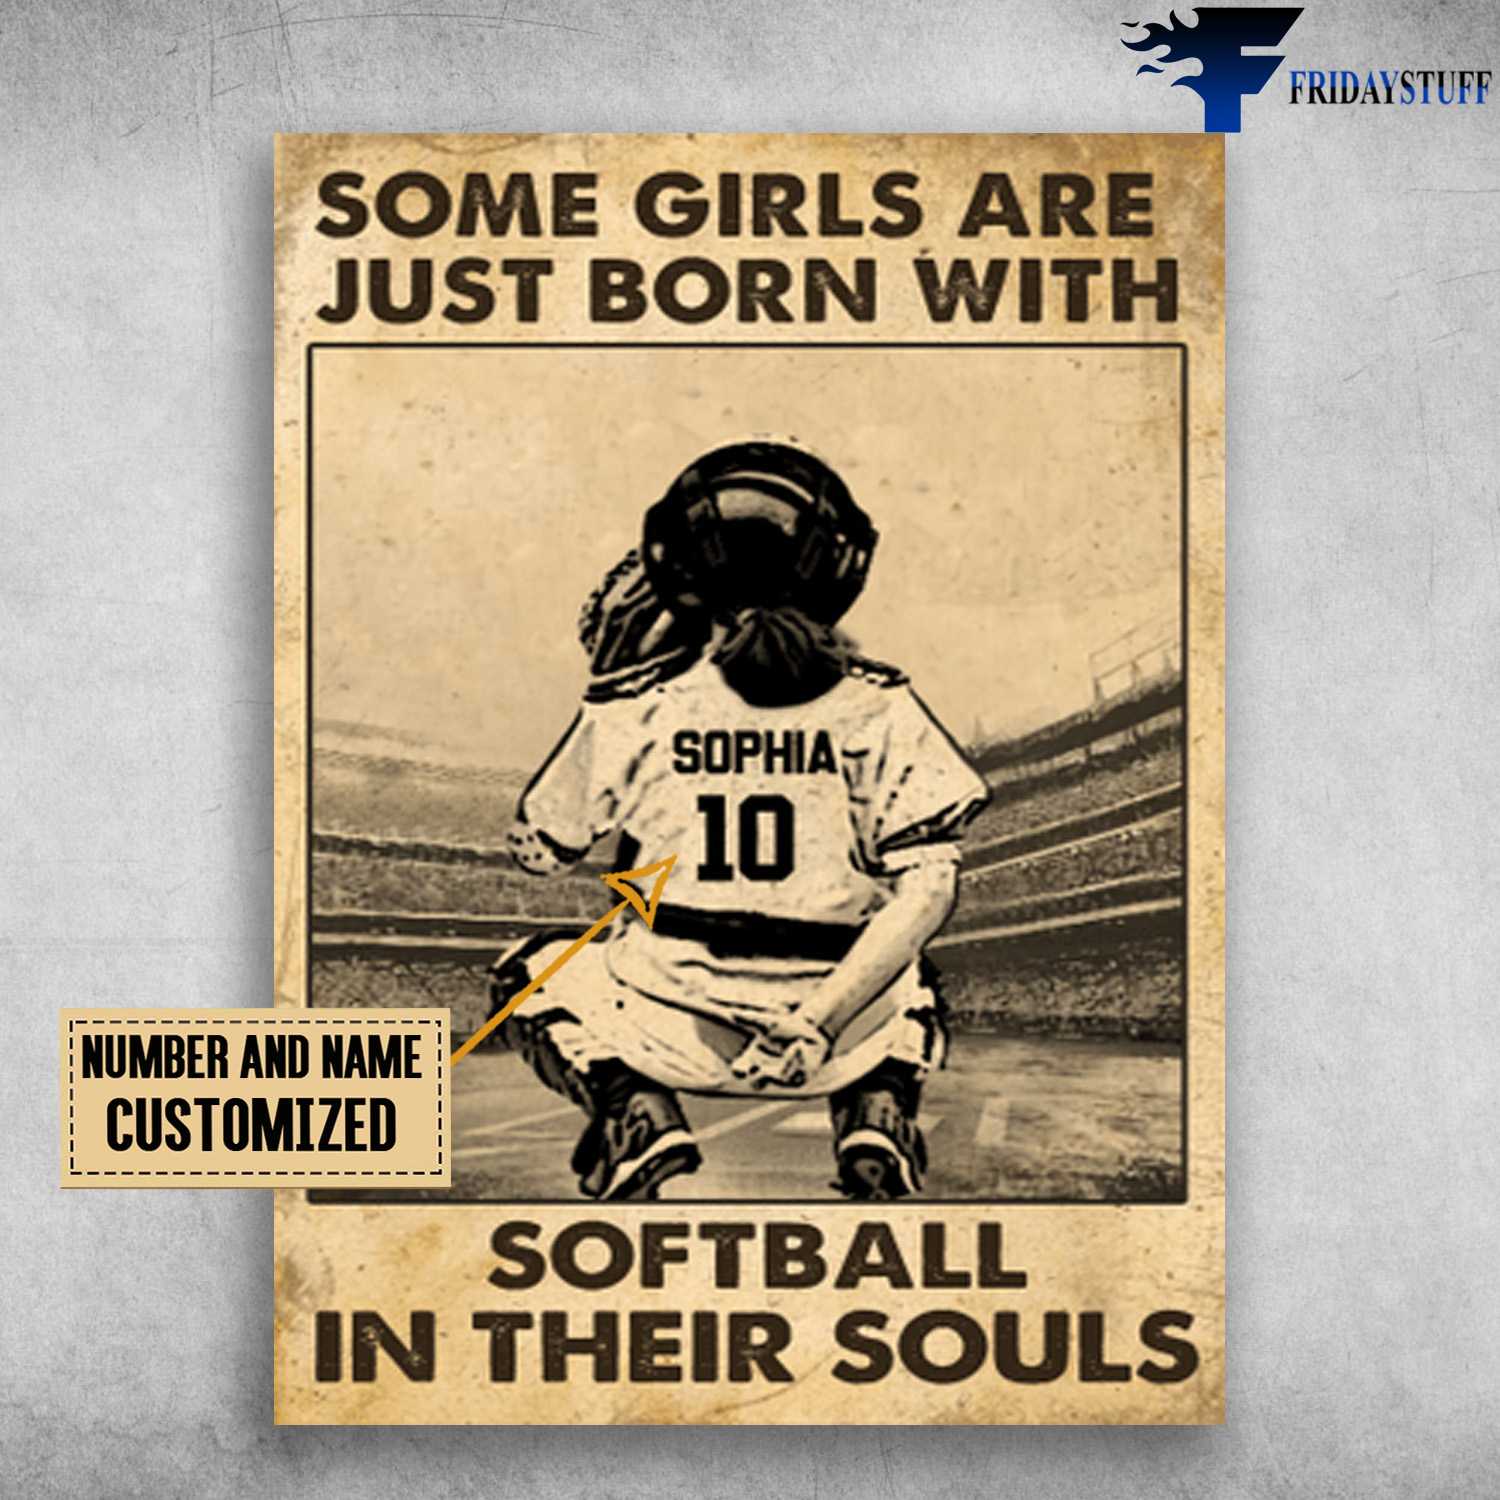 Softball Player, Some Girls Are Just Born With, Softball In Their Souls